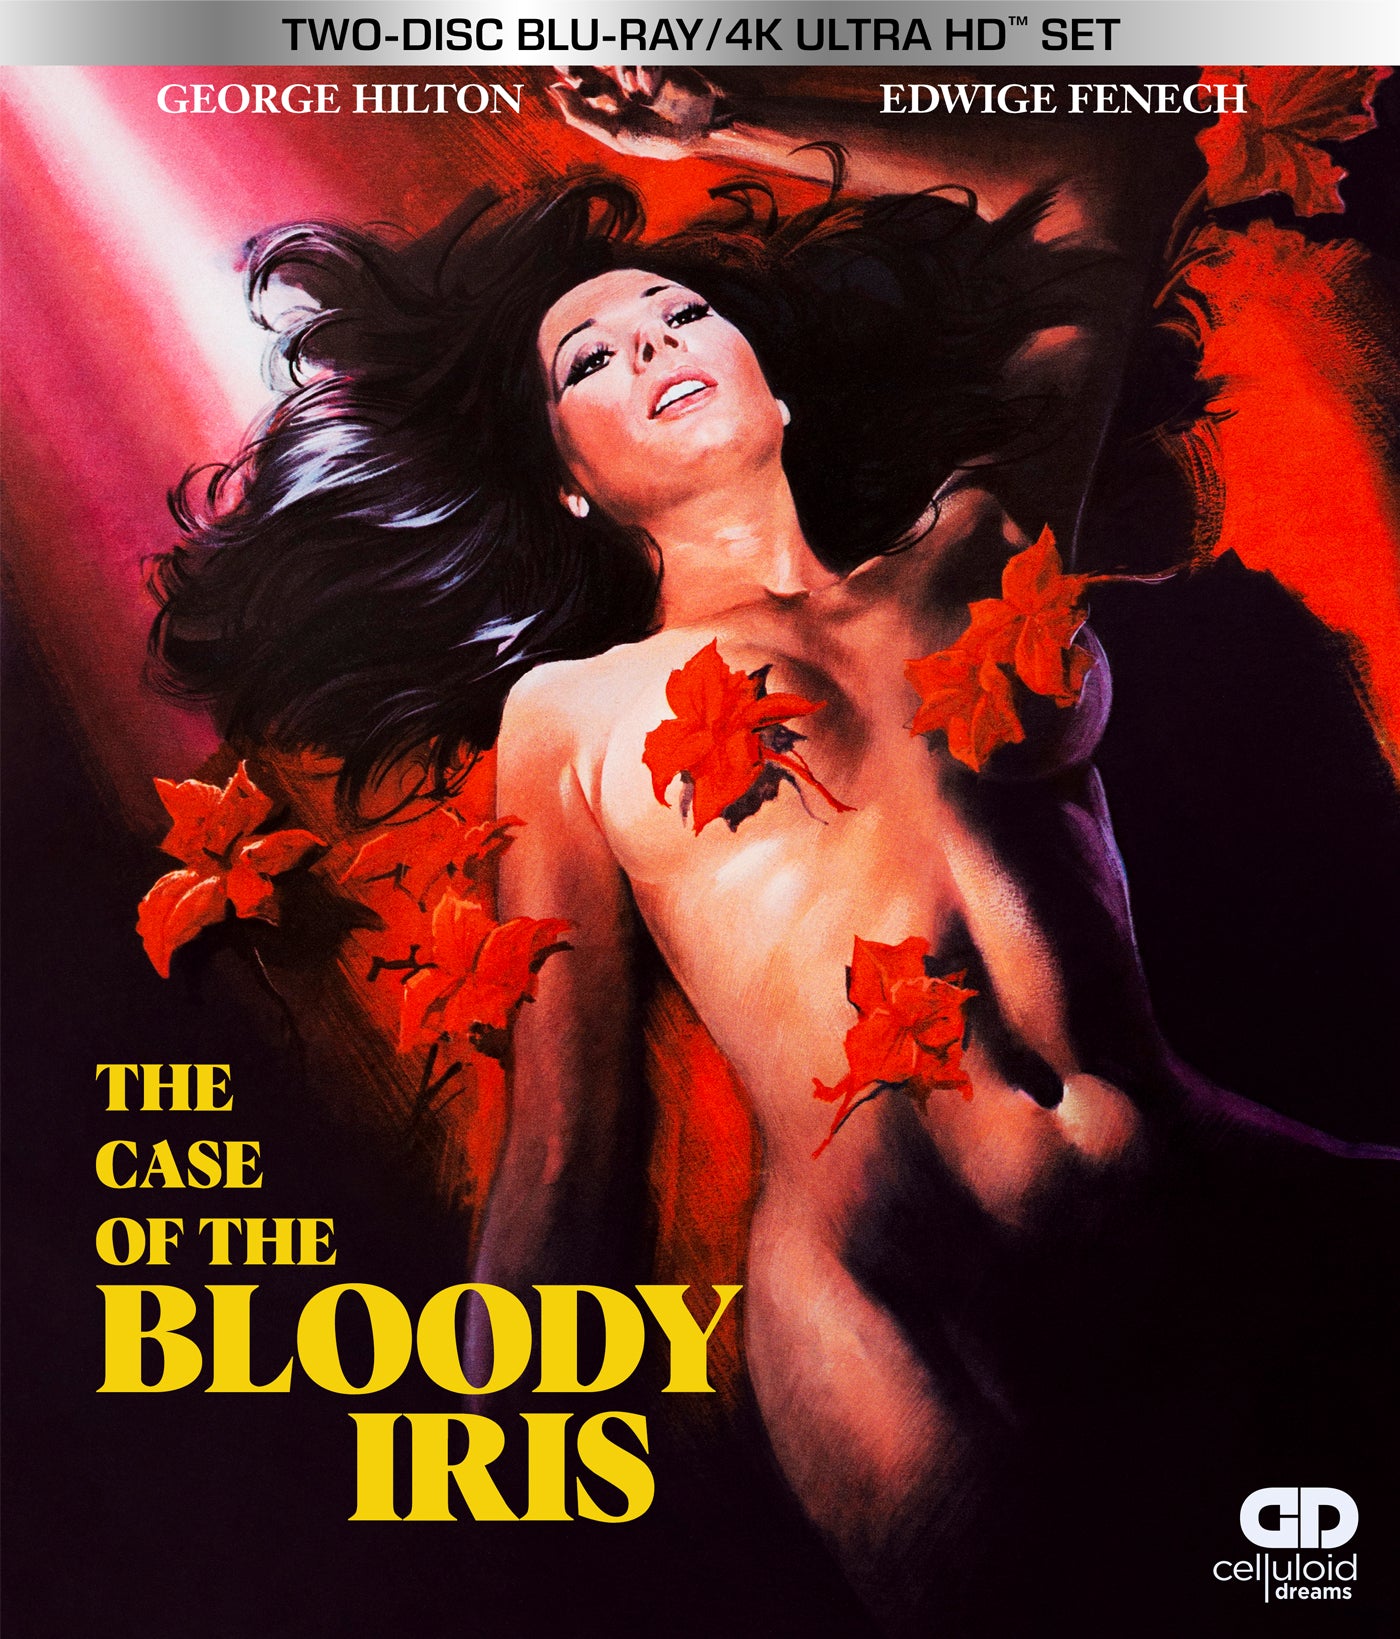 The Case of The Bloody Iris (Celluloid Dreams) [Preorder date change] SEE NOTE